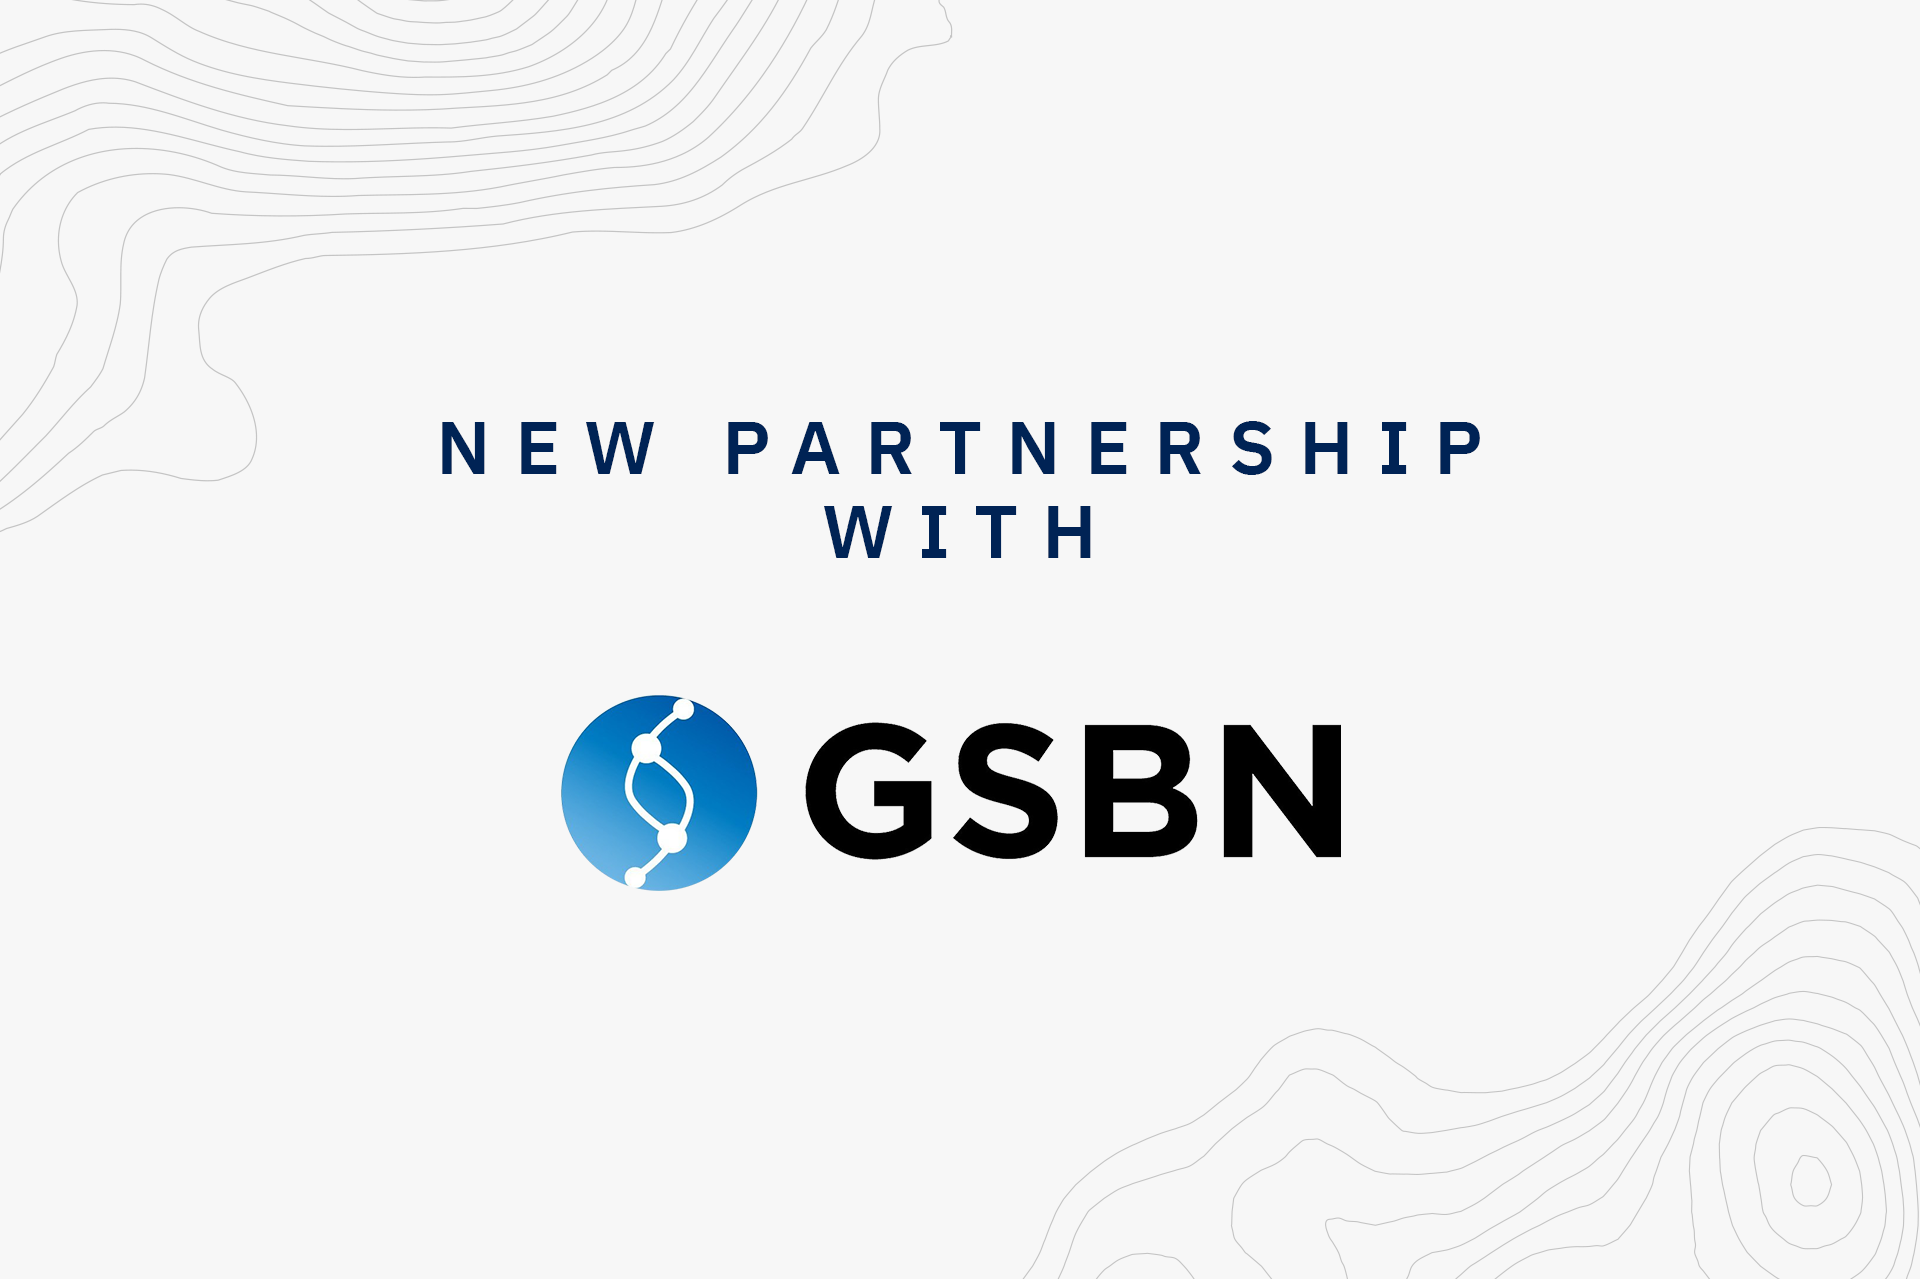 Contour and GSBN partner to drive digitisation across global shipping industry